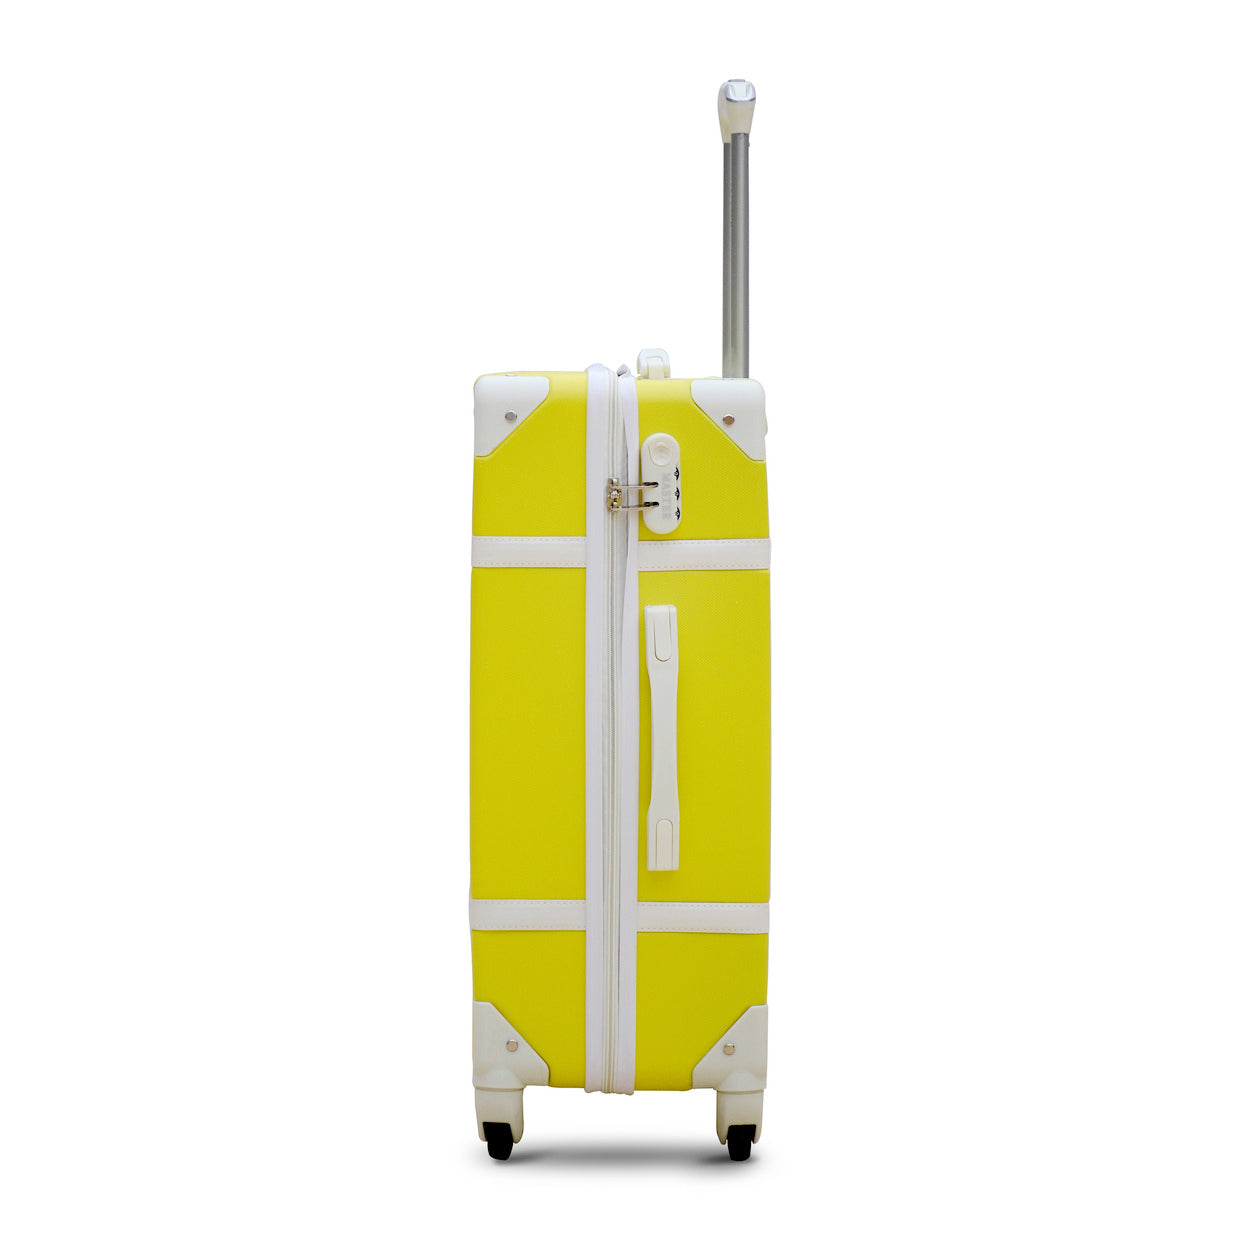 28 Inches Yellow Colour Corner Guard ABS Luggage Lightweight Hard Case Trolley Bag | 2 Year Warranty